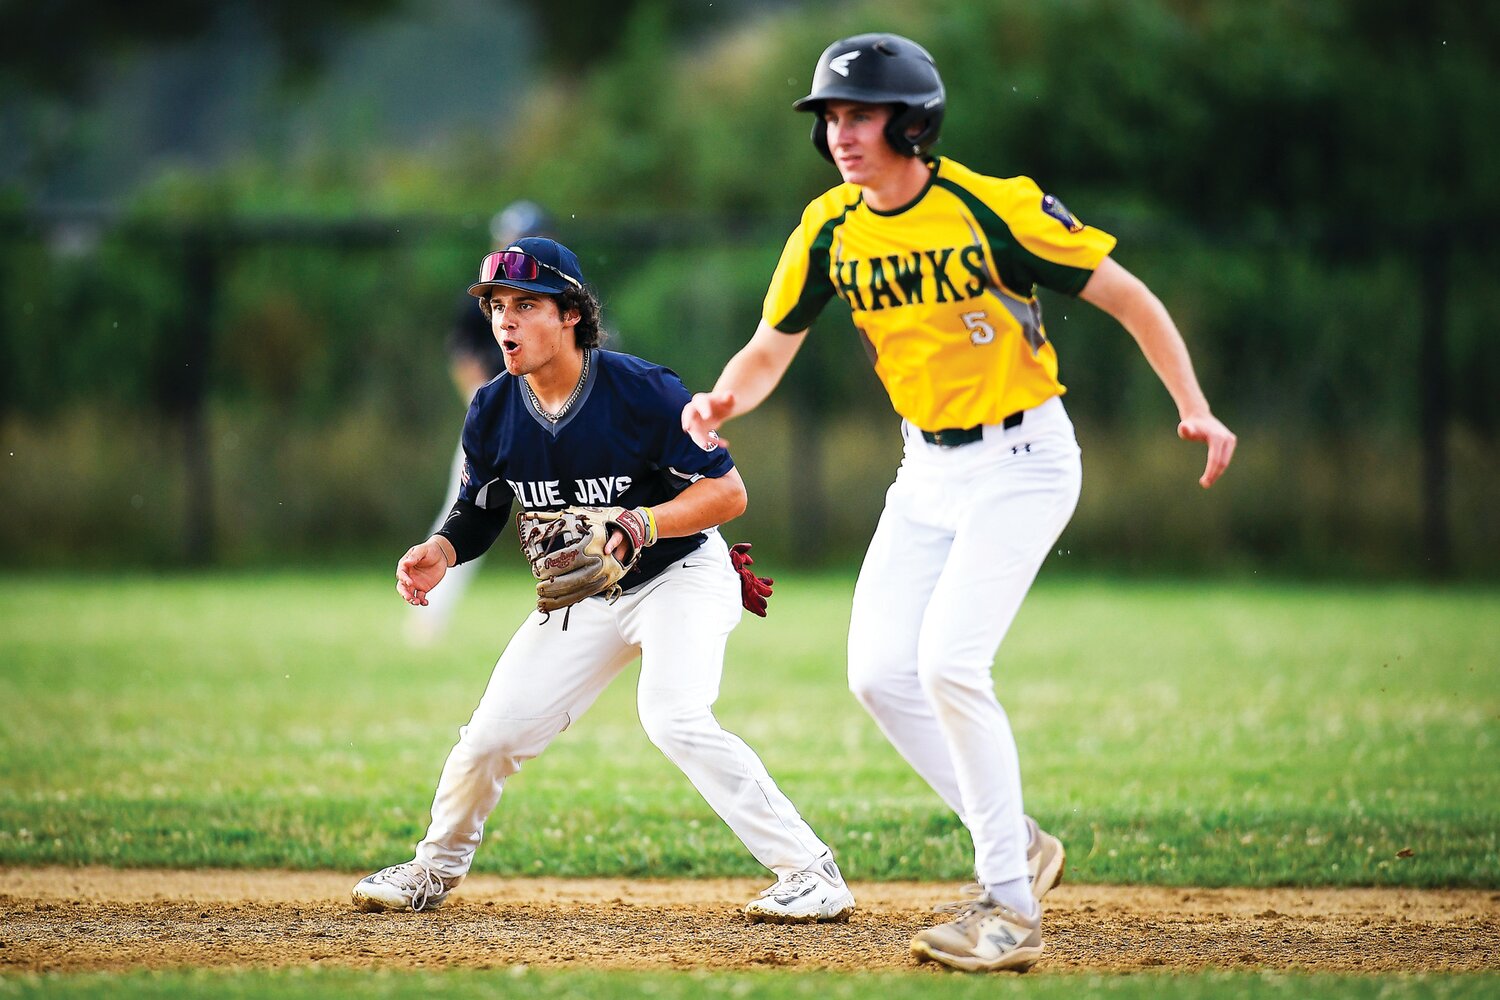 Quakertown shortstop Danny Qualteria during second-inning play Monday as Nor-Gwyn’s Will Chiappa leads off the bag.